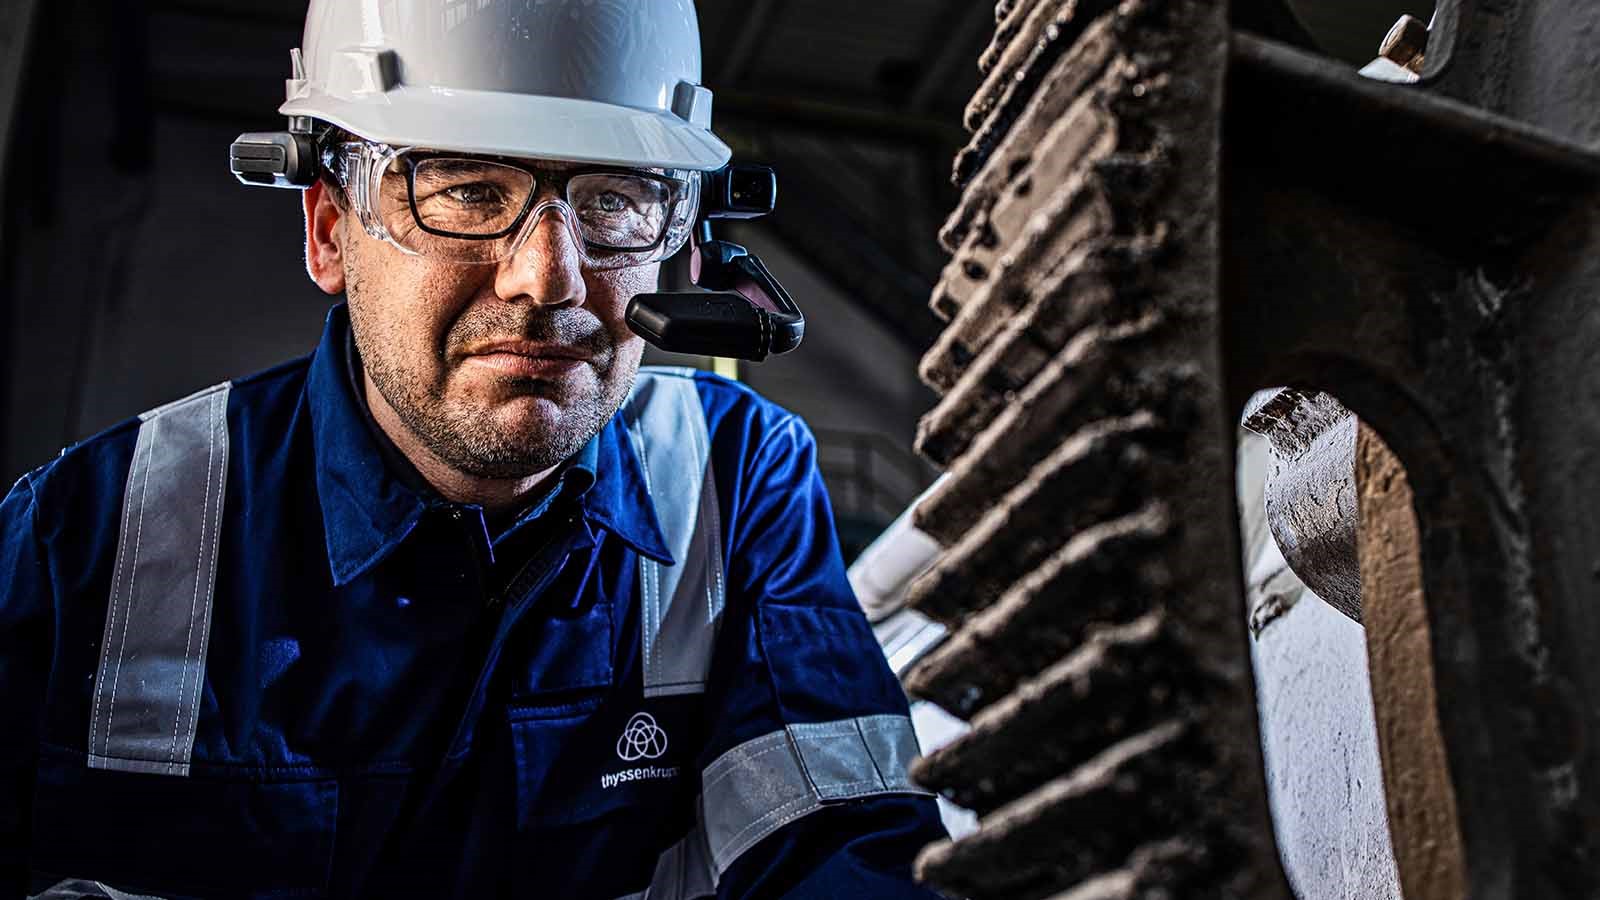 Service technician equipped with RealWear HMT-1 smart glasses and connected with experts worldwide via oculavis SHARE